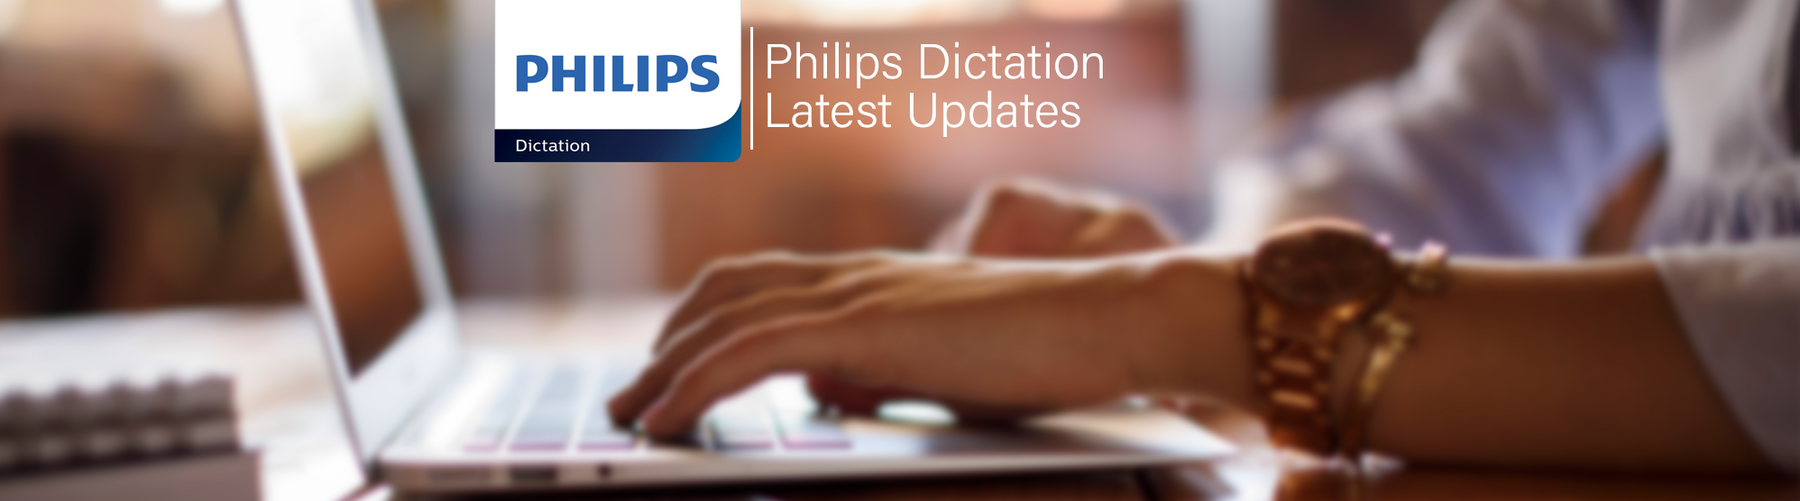 New: Philips Dictation Latest Updates